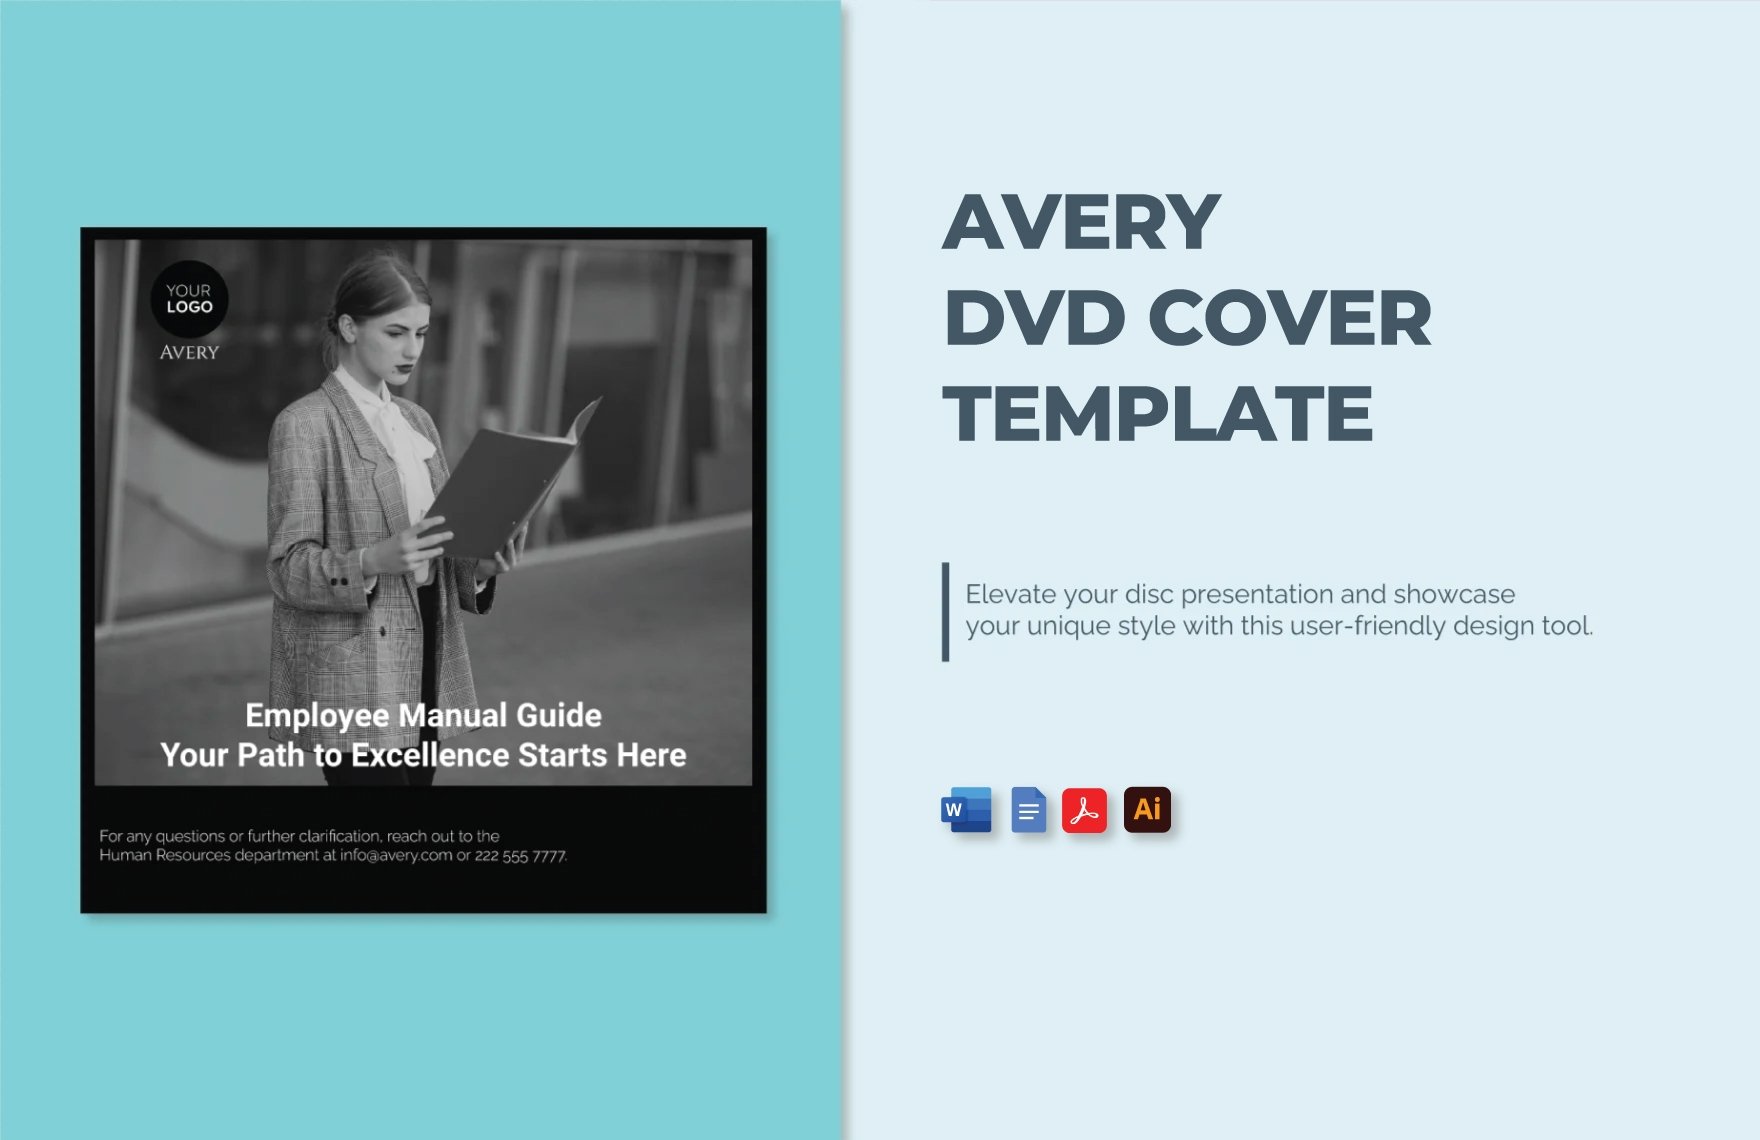 Avery DVD Cover Template